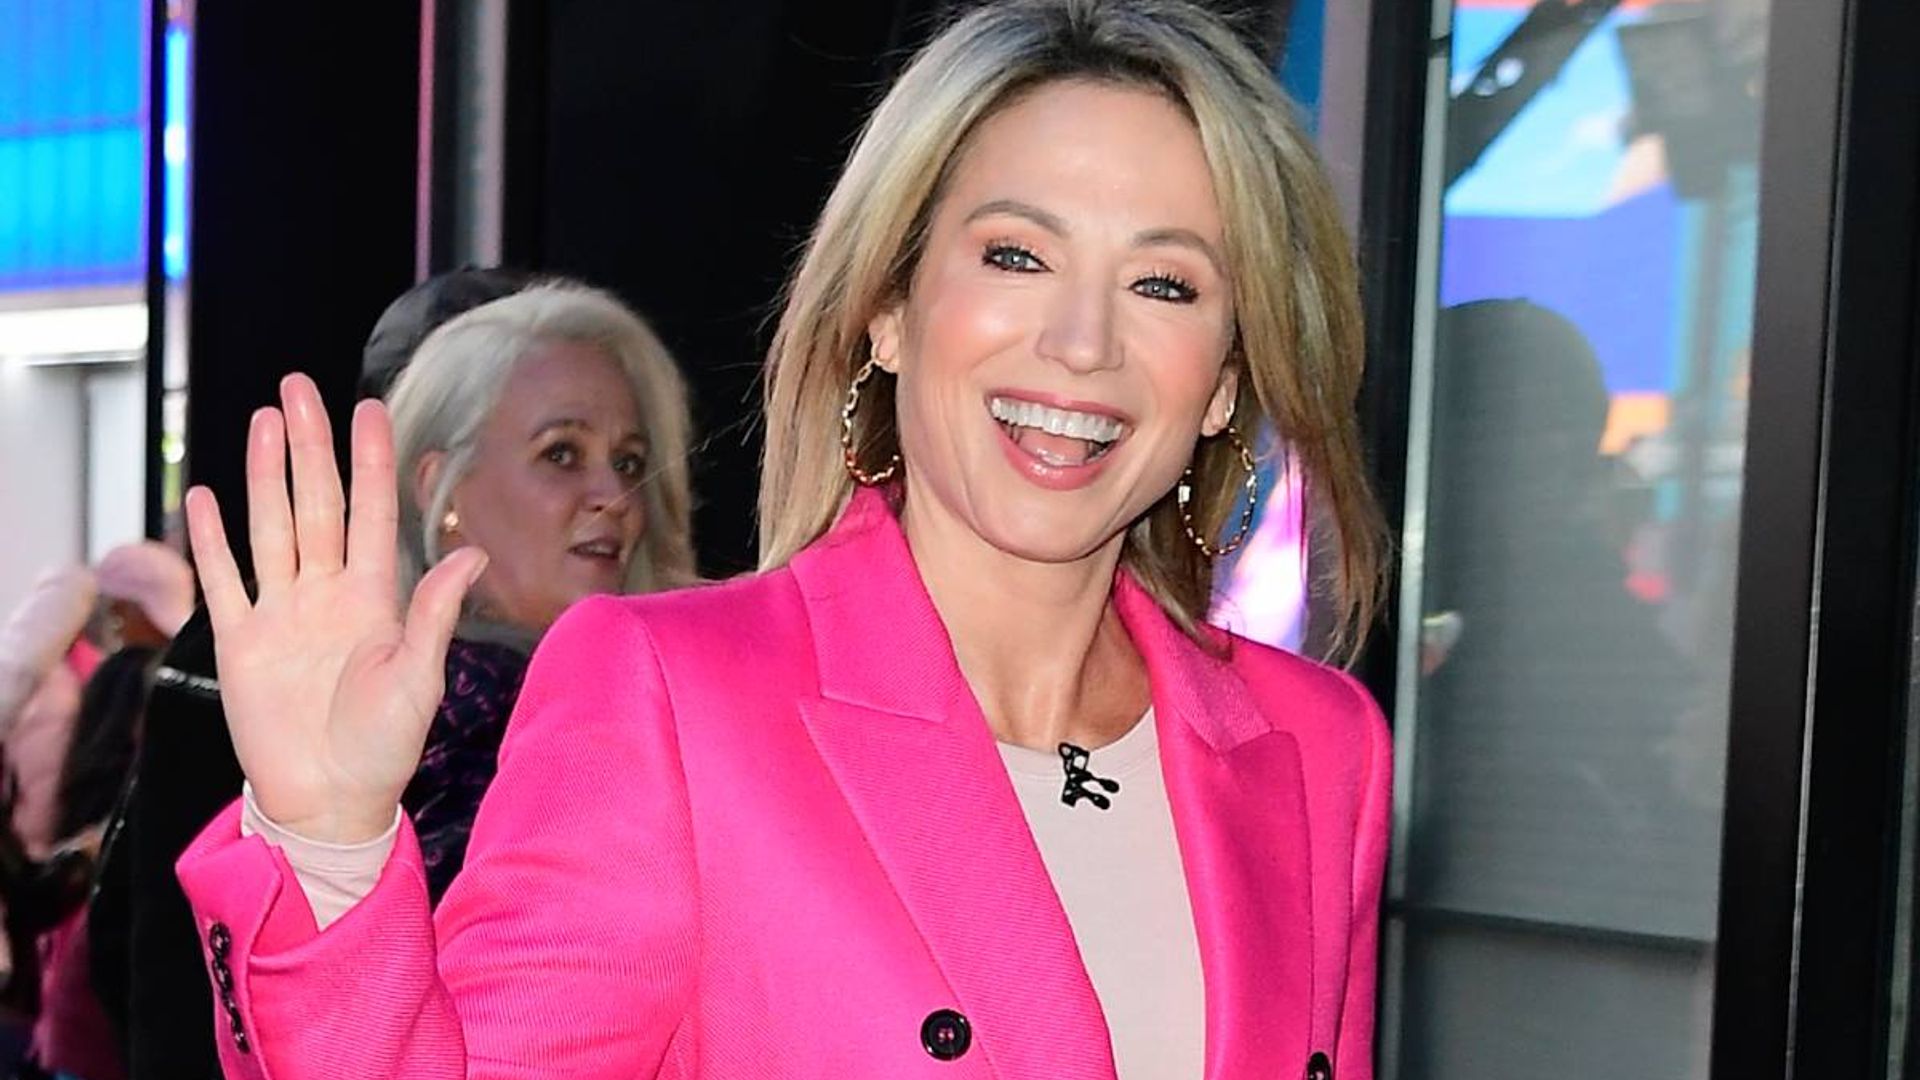 GMA's Amy Robach's leading new role on show revealed as she supports co